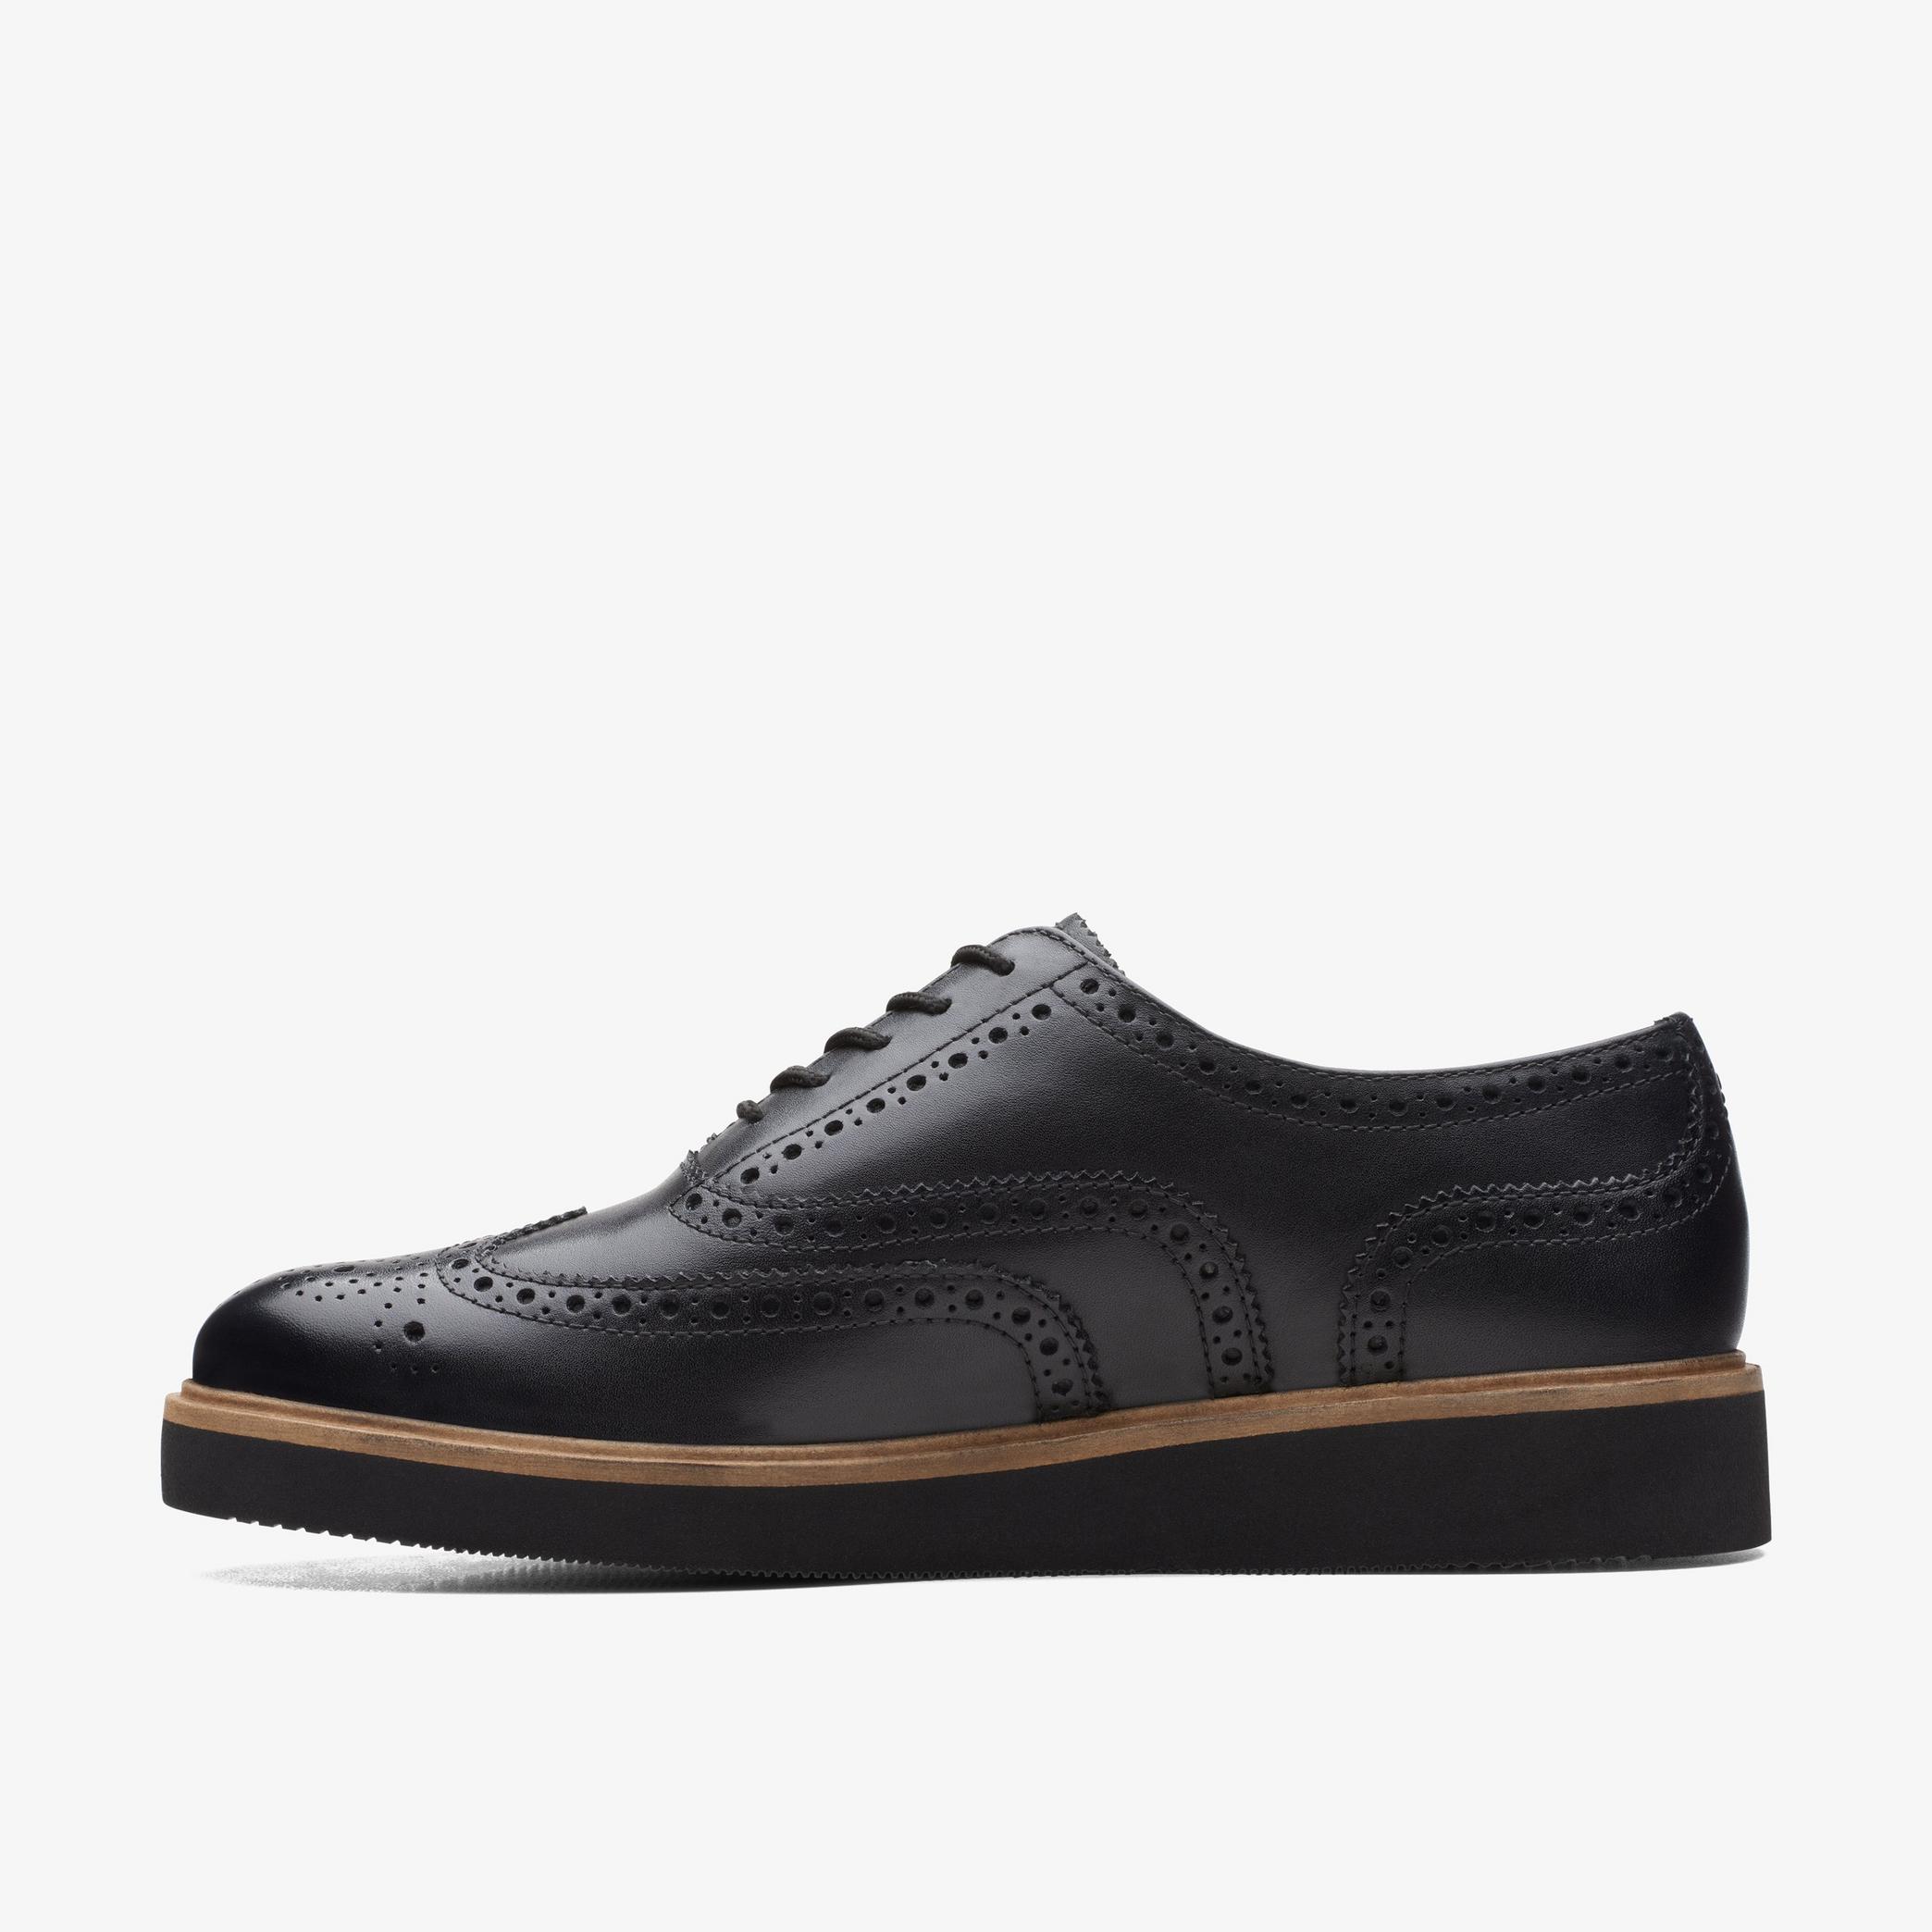 Glickly Brogue Black Leather Brogues, view 2 of 6